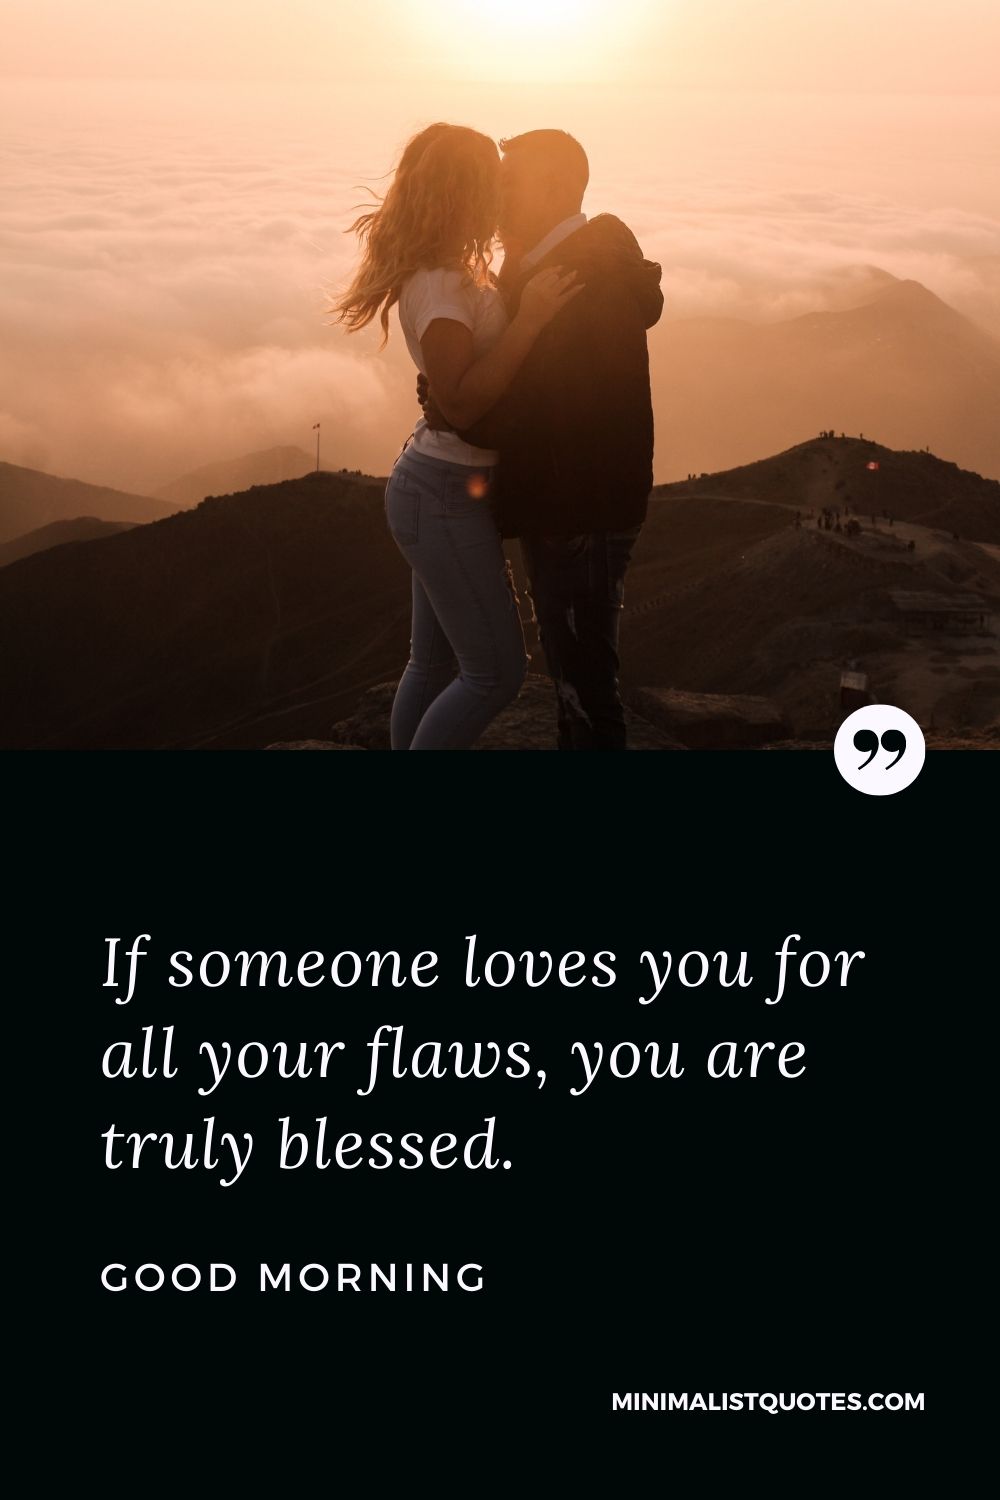 Good Morning Wish & Message With Image: If someone loves you for all your flaws, you are truly blessed.